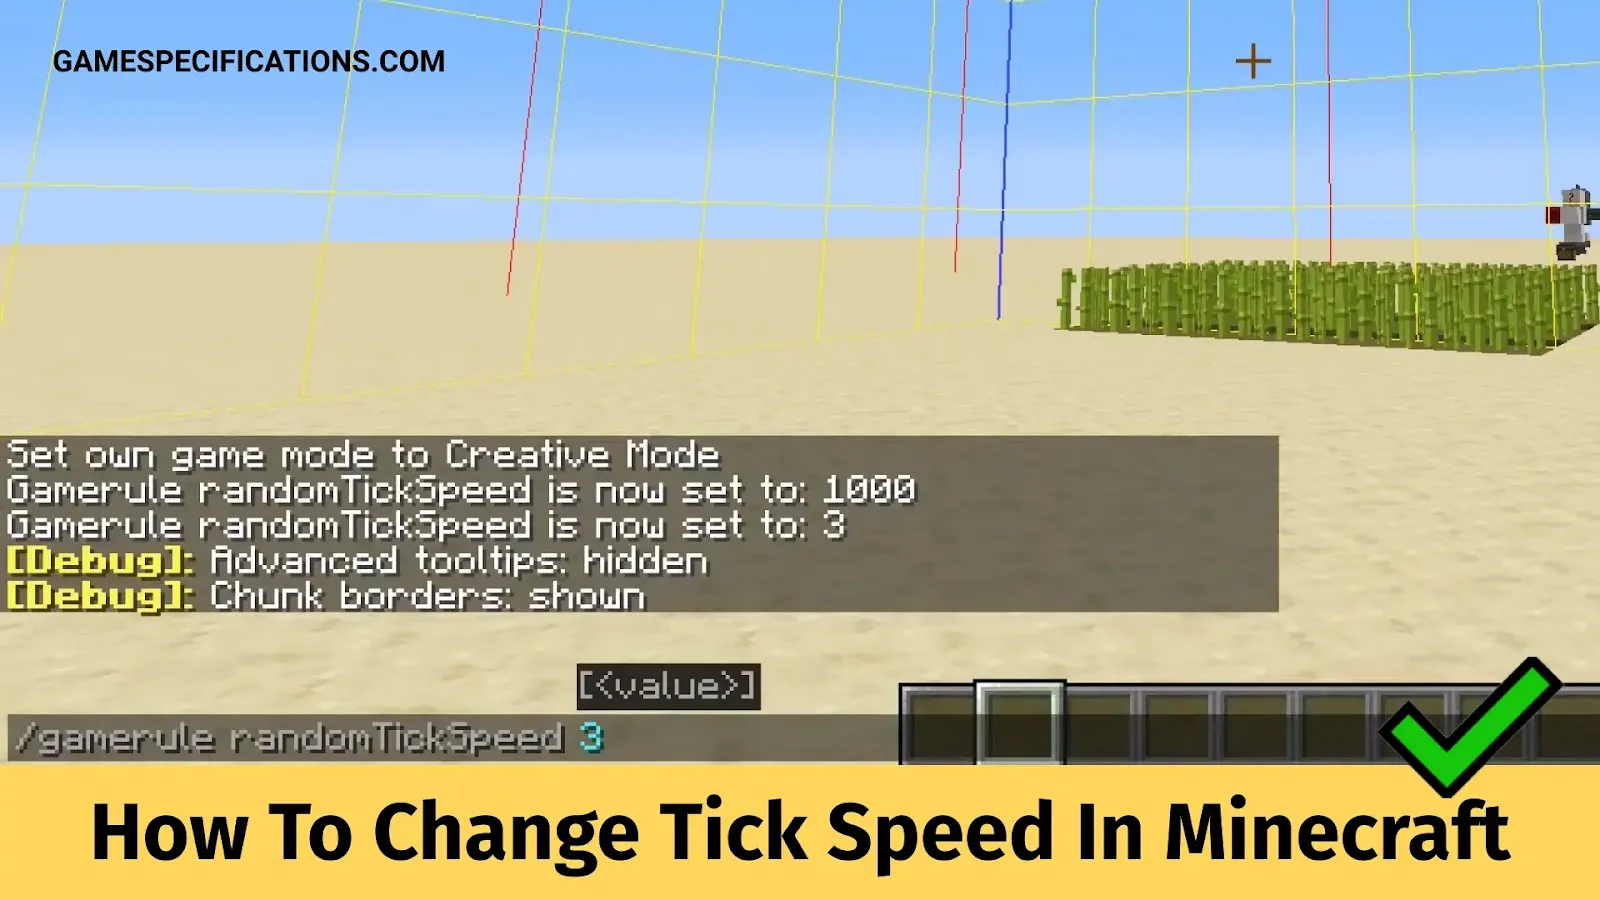 Image showing in-game changes to tick speed settings